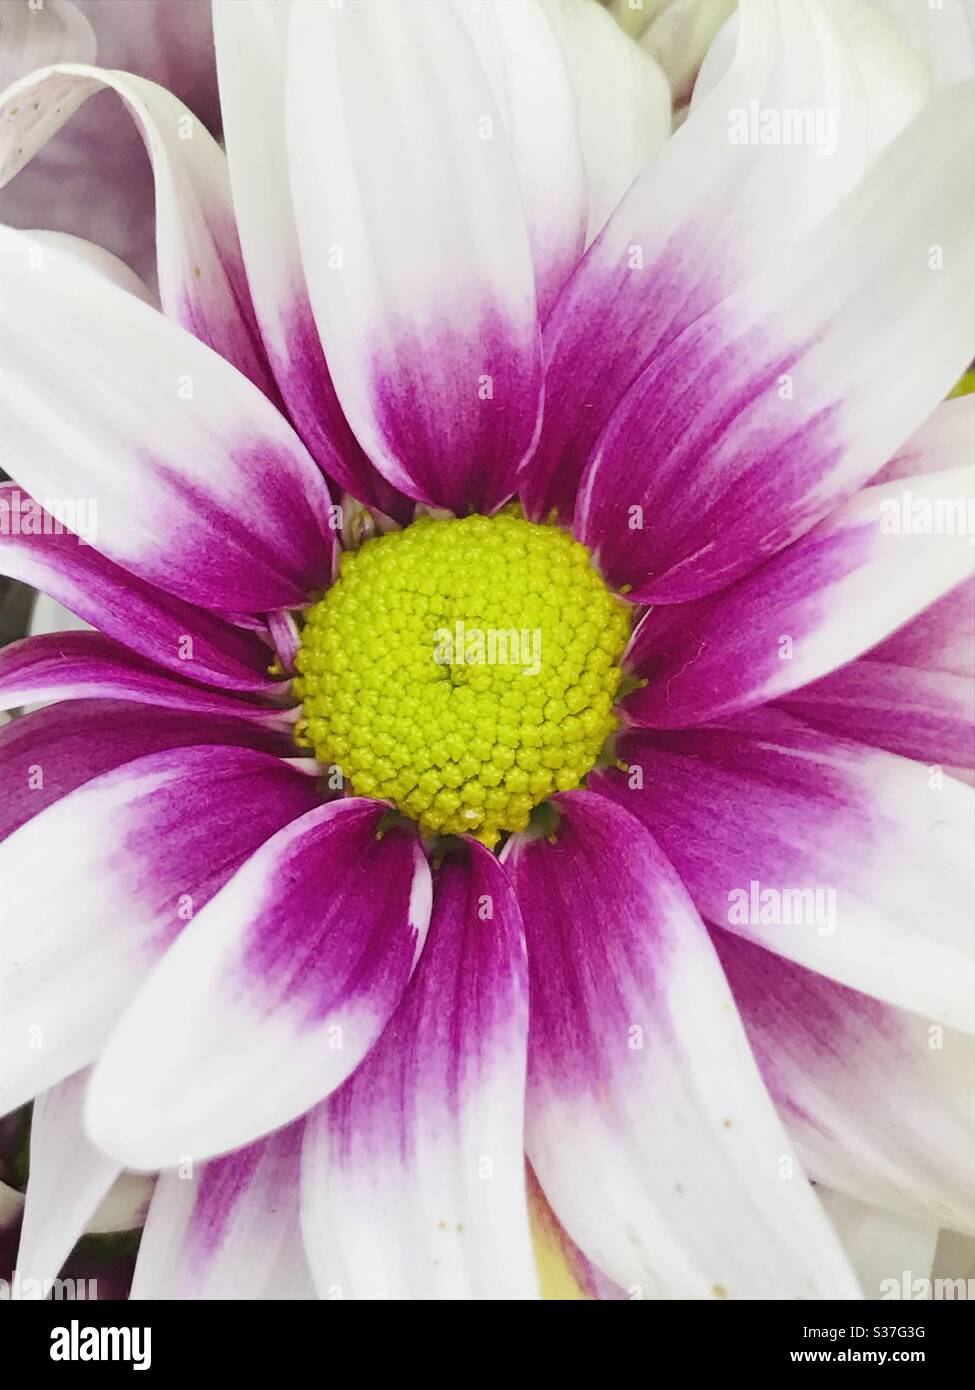 Pink white Chrysanthemum for sale with yellow pollen -showing expanse of petals and centre stamen Stock Photo